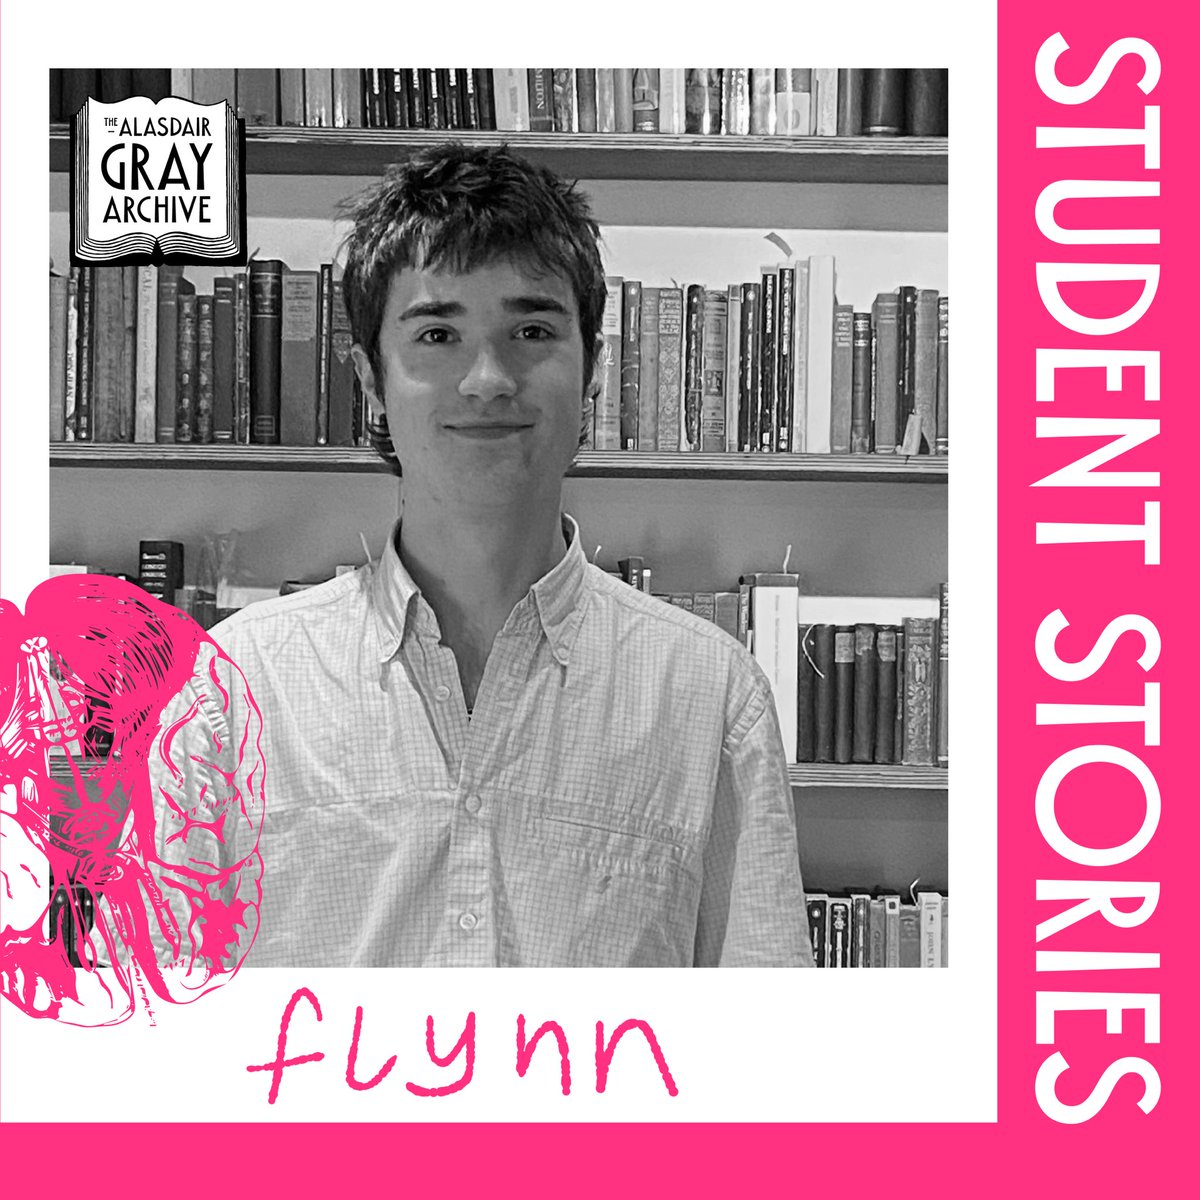 Meet Flynn Gash who is studying English Literature with History of Art @EdinburghUni Flynn has been working on the library & a self led project documenting the changes of the area around @WhiskyBond & mapping the changes since Alasdair photographed it in the 1960s